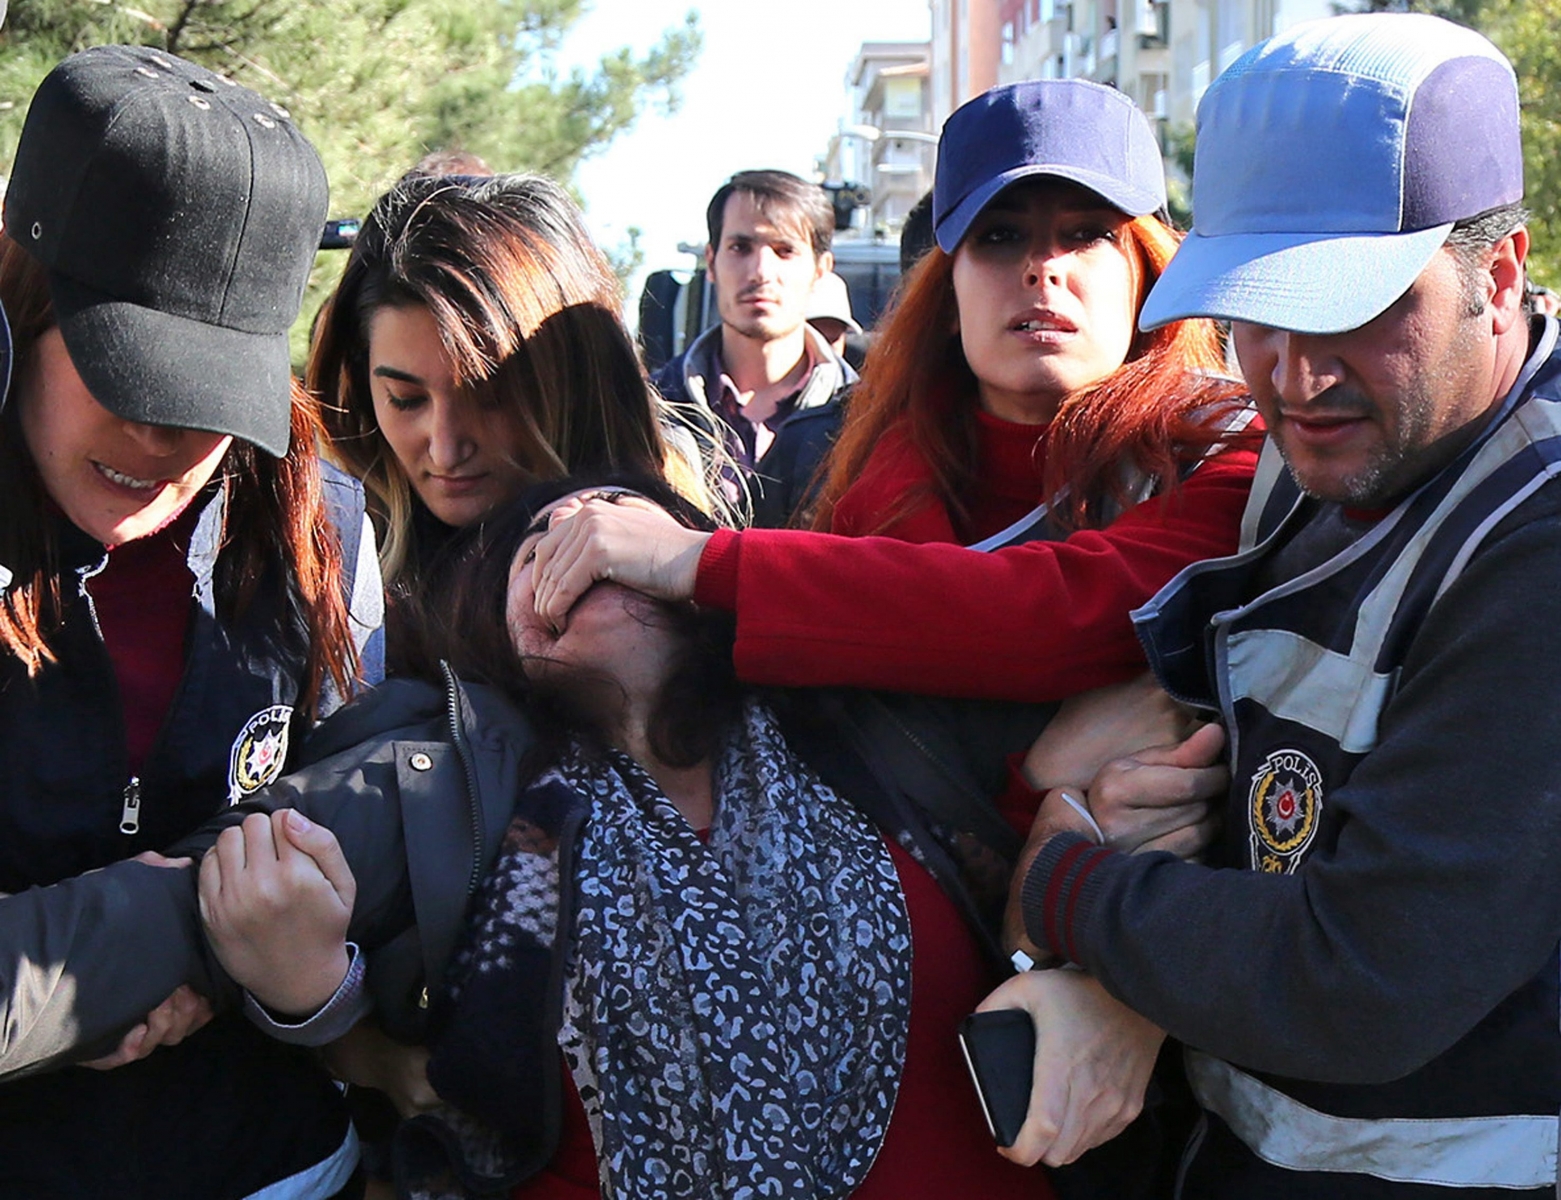 epa05617513 Plainclothed Turkish police hold the mouth shut of former Kurdish parliamentarian Sebahat Tuncel (C) as they arrest her during a anti-government protest in Diyarbakir, Turkey, 04 November 2016. Co-leaders of the pro-Kurdish and pro-minority political party Peoples' Democratic Party (HDP) Figen Yuksekdag and Selahattin Demirtas were detained, along with at least nine other members of parliament (MPs), as part of a counter-terrorism investigation following a police raid in the HDP party headquarters. The HDP is accused by the Turkish government to have links with the Kurdistan Workers' Party (PKK) militant group, an accusation HDP strongly denies  EPA/STR TURKEY POLITICS PARTIES PROTEST